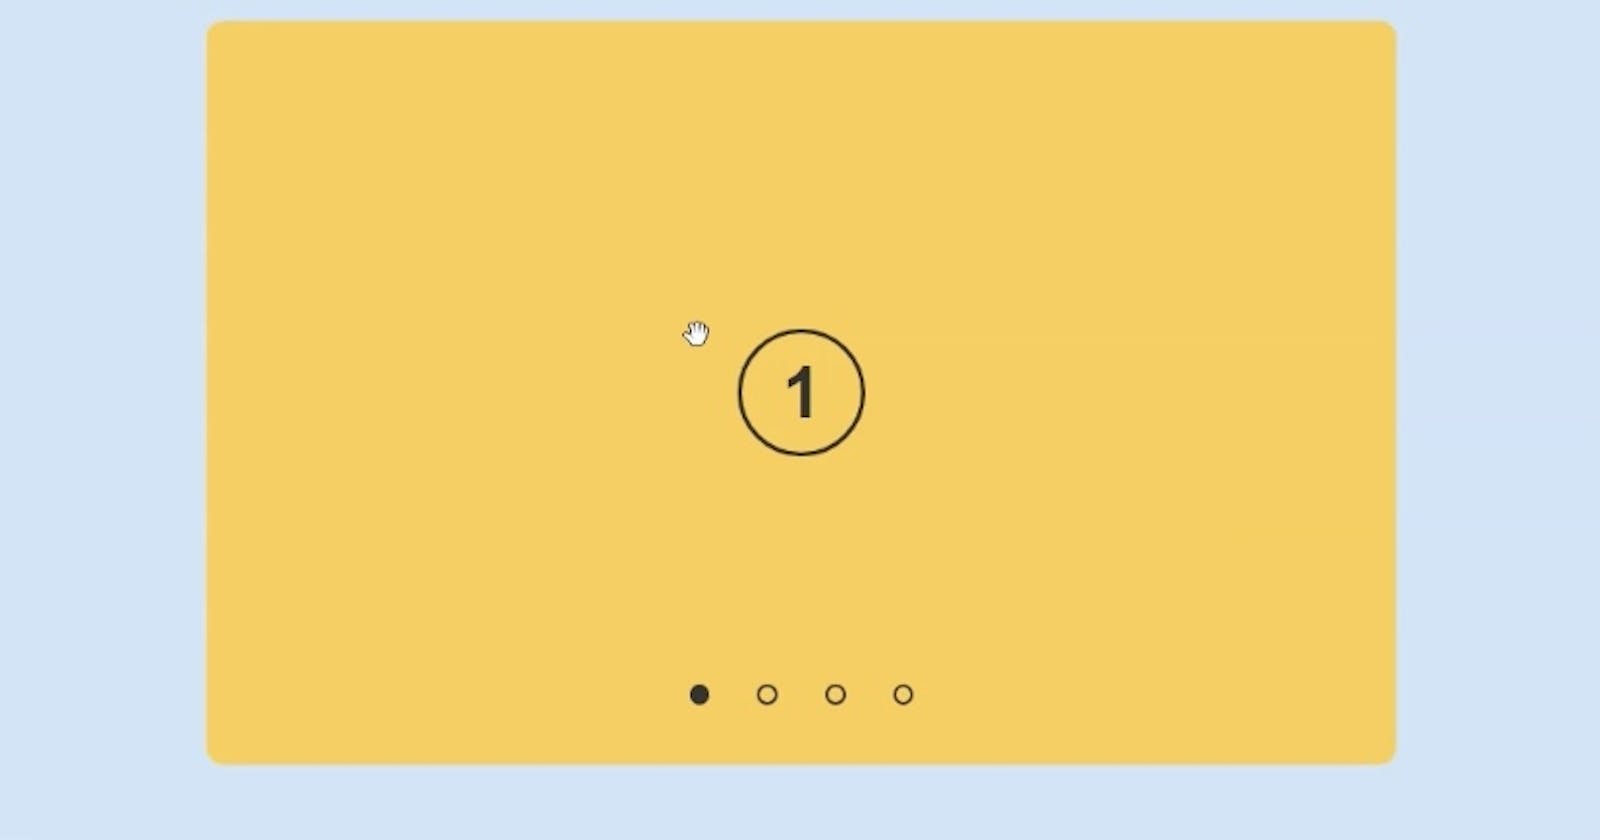 Vanilla JavaScript: How To Create a Draggable Slider With Auto-Play and Navigation.